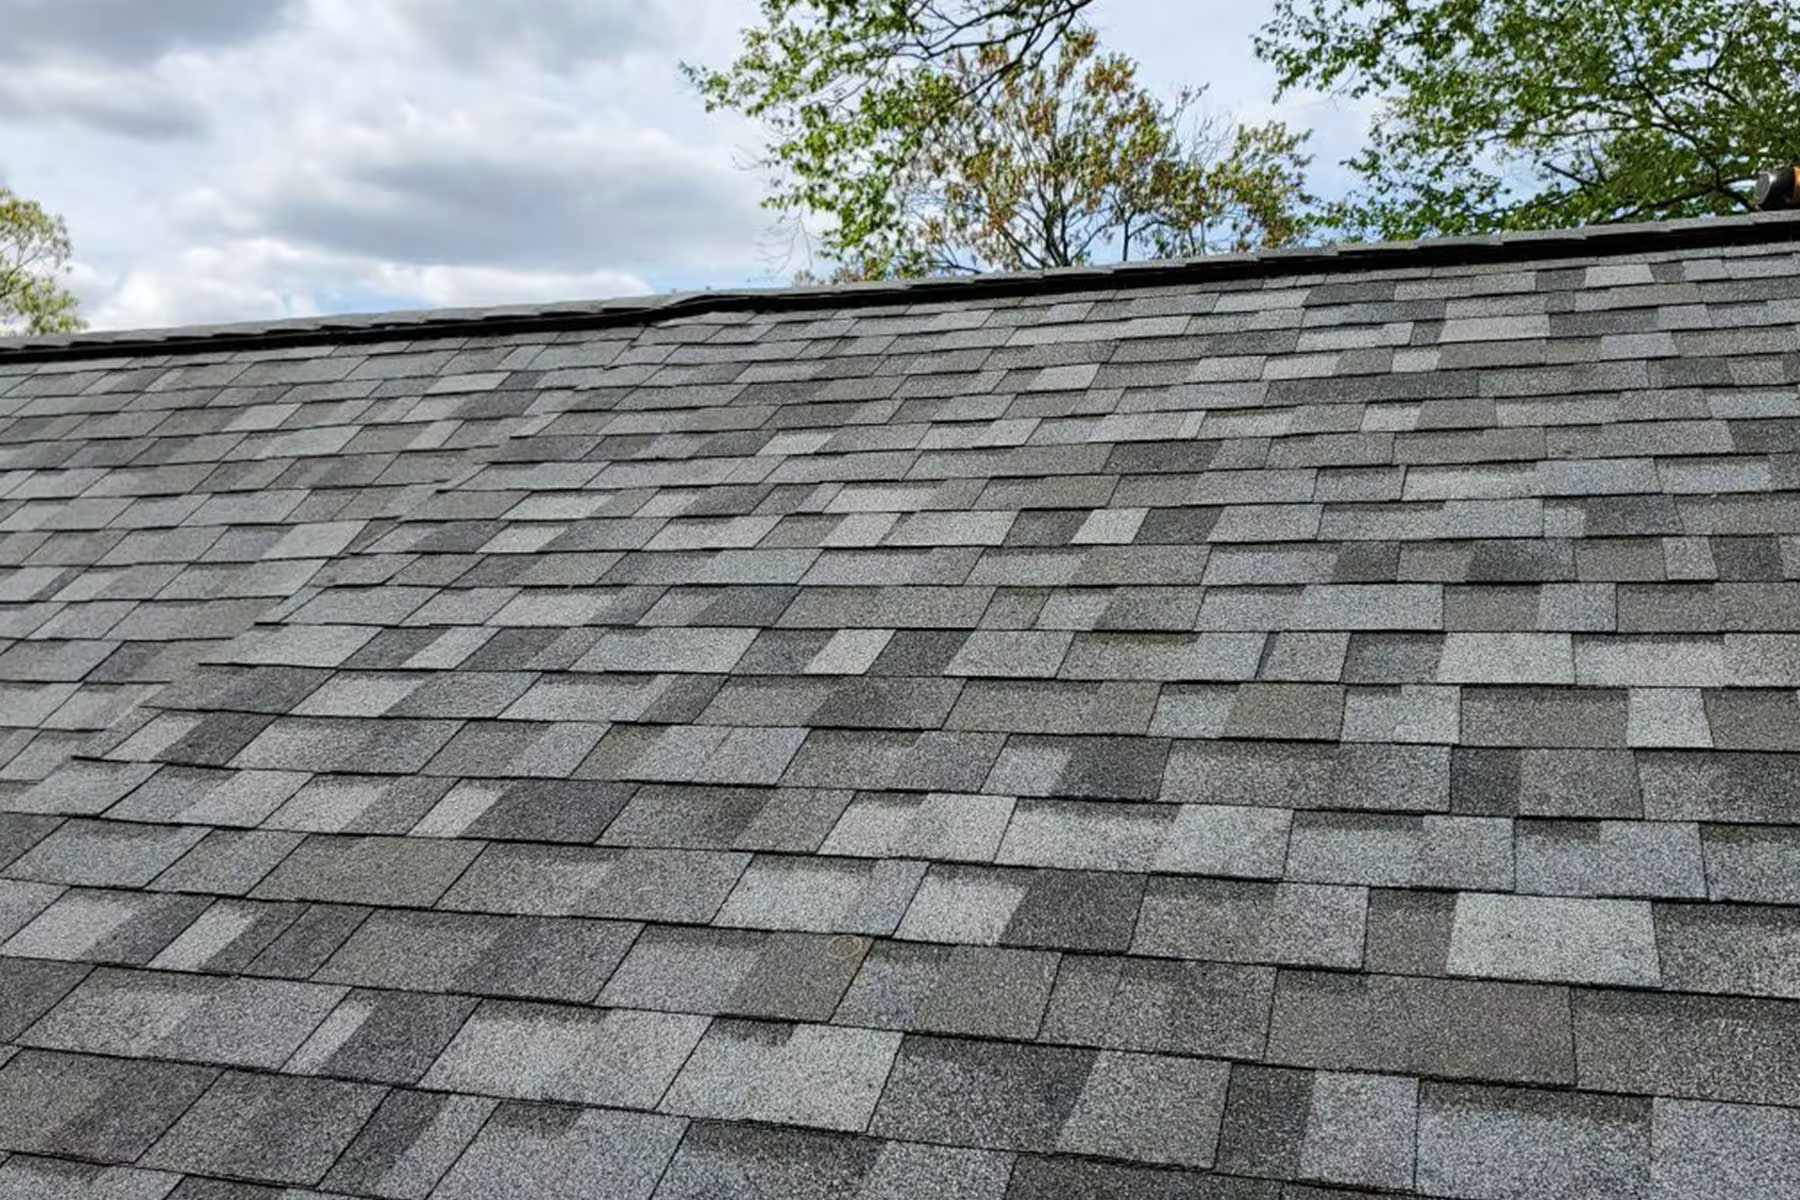 How Much Does It Cost To Replace A Shingle Roof